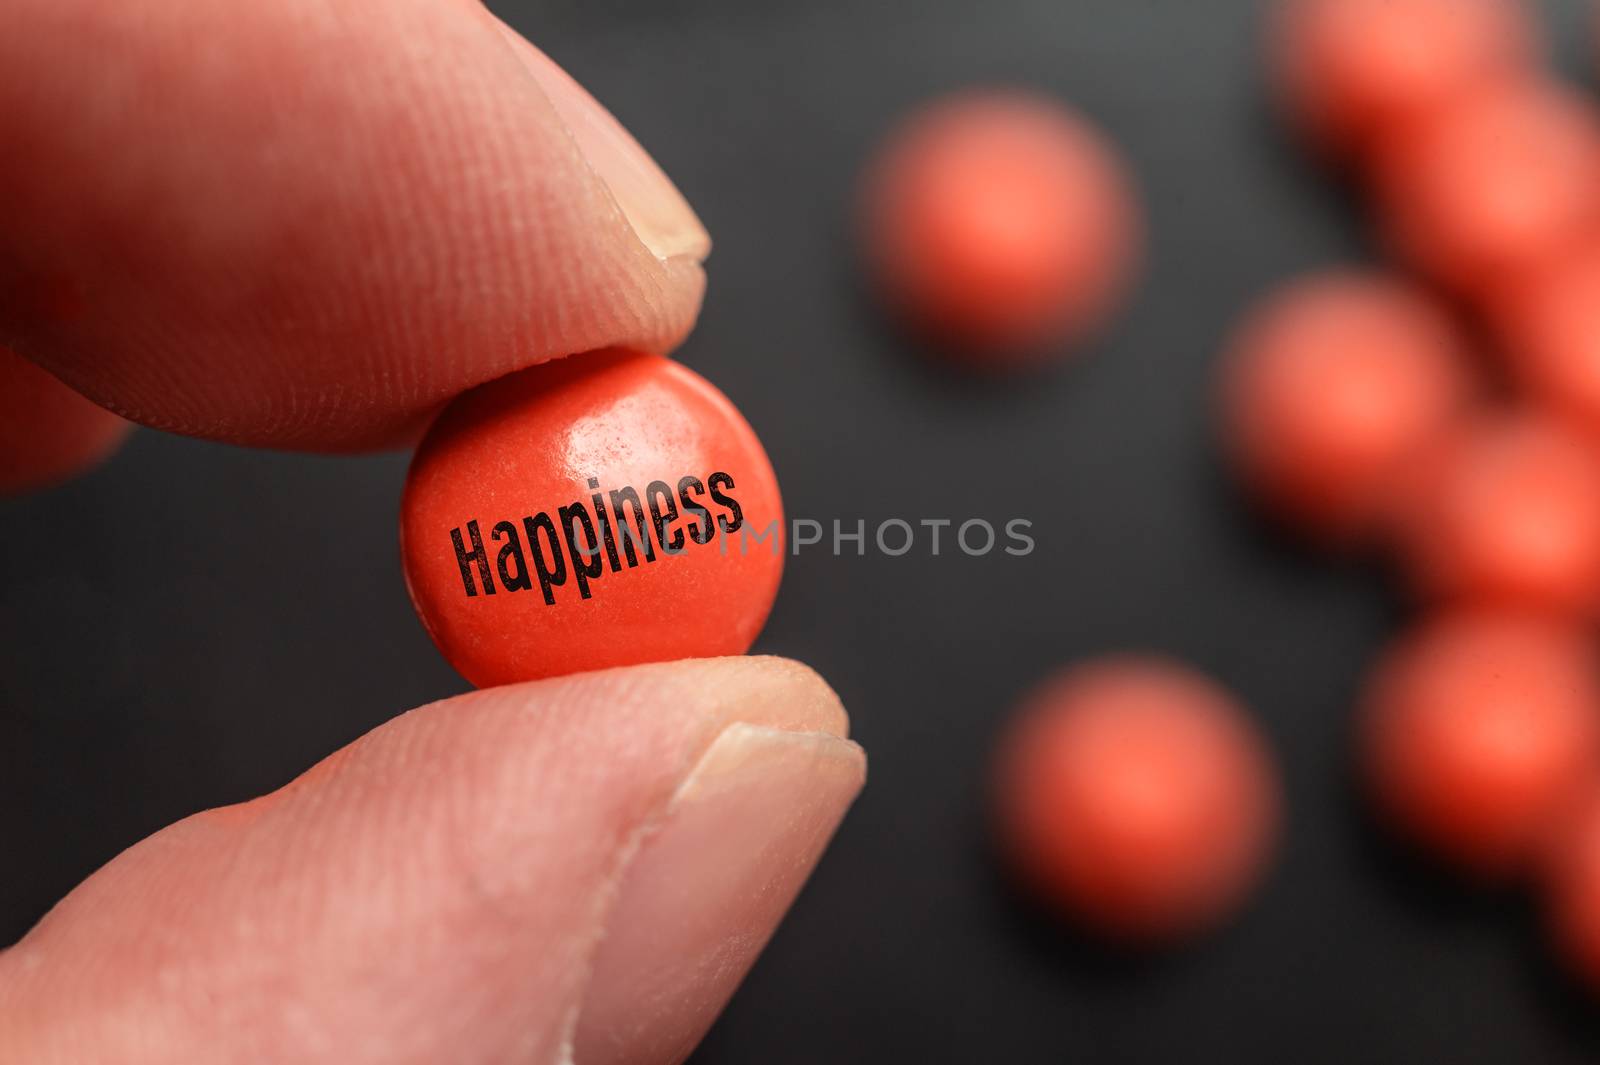 Fingers holding a pill with Happiness label.